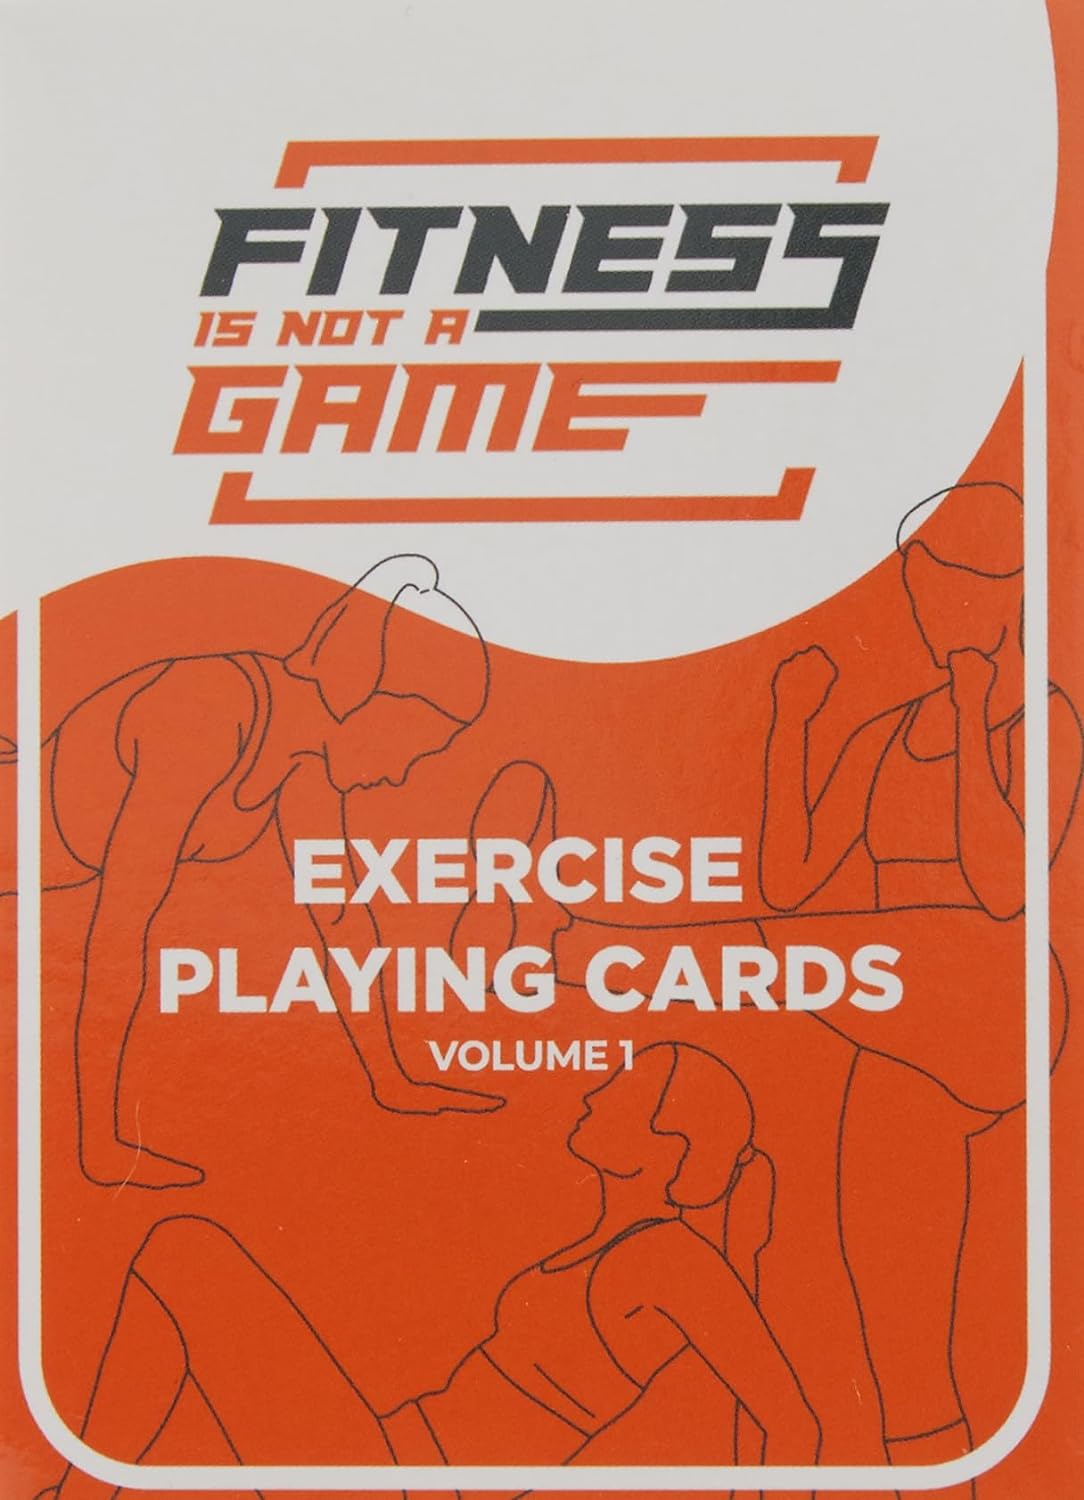 Fitness Is NOT A Game Exercise Playing Cards | 52-Card Deck | Bodyweight | All Fitness Levels | Strength Training and Cardio | at-Home Workout | Family Game Night | Fun